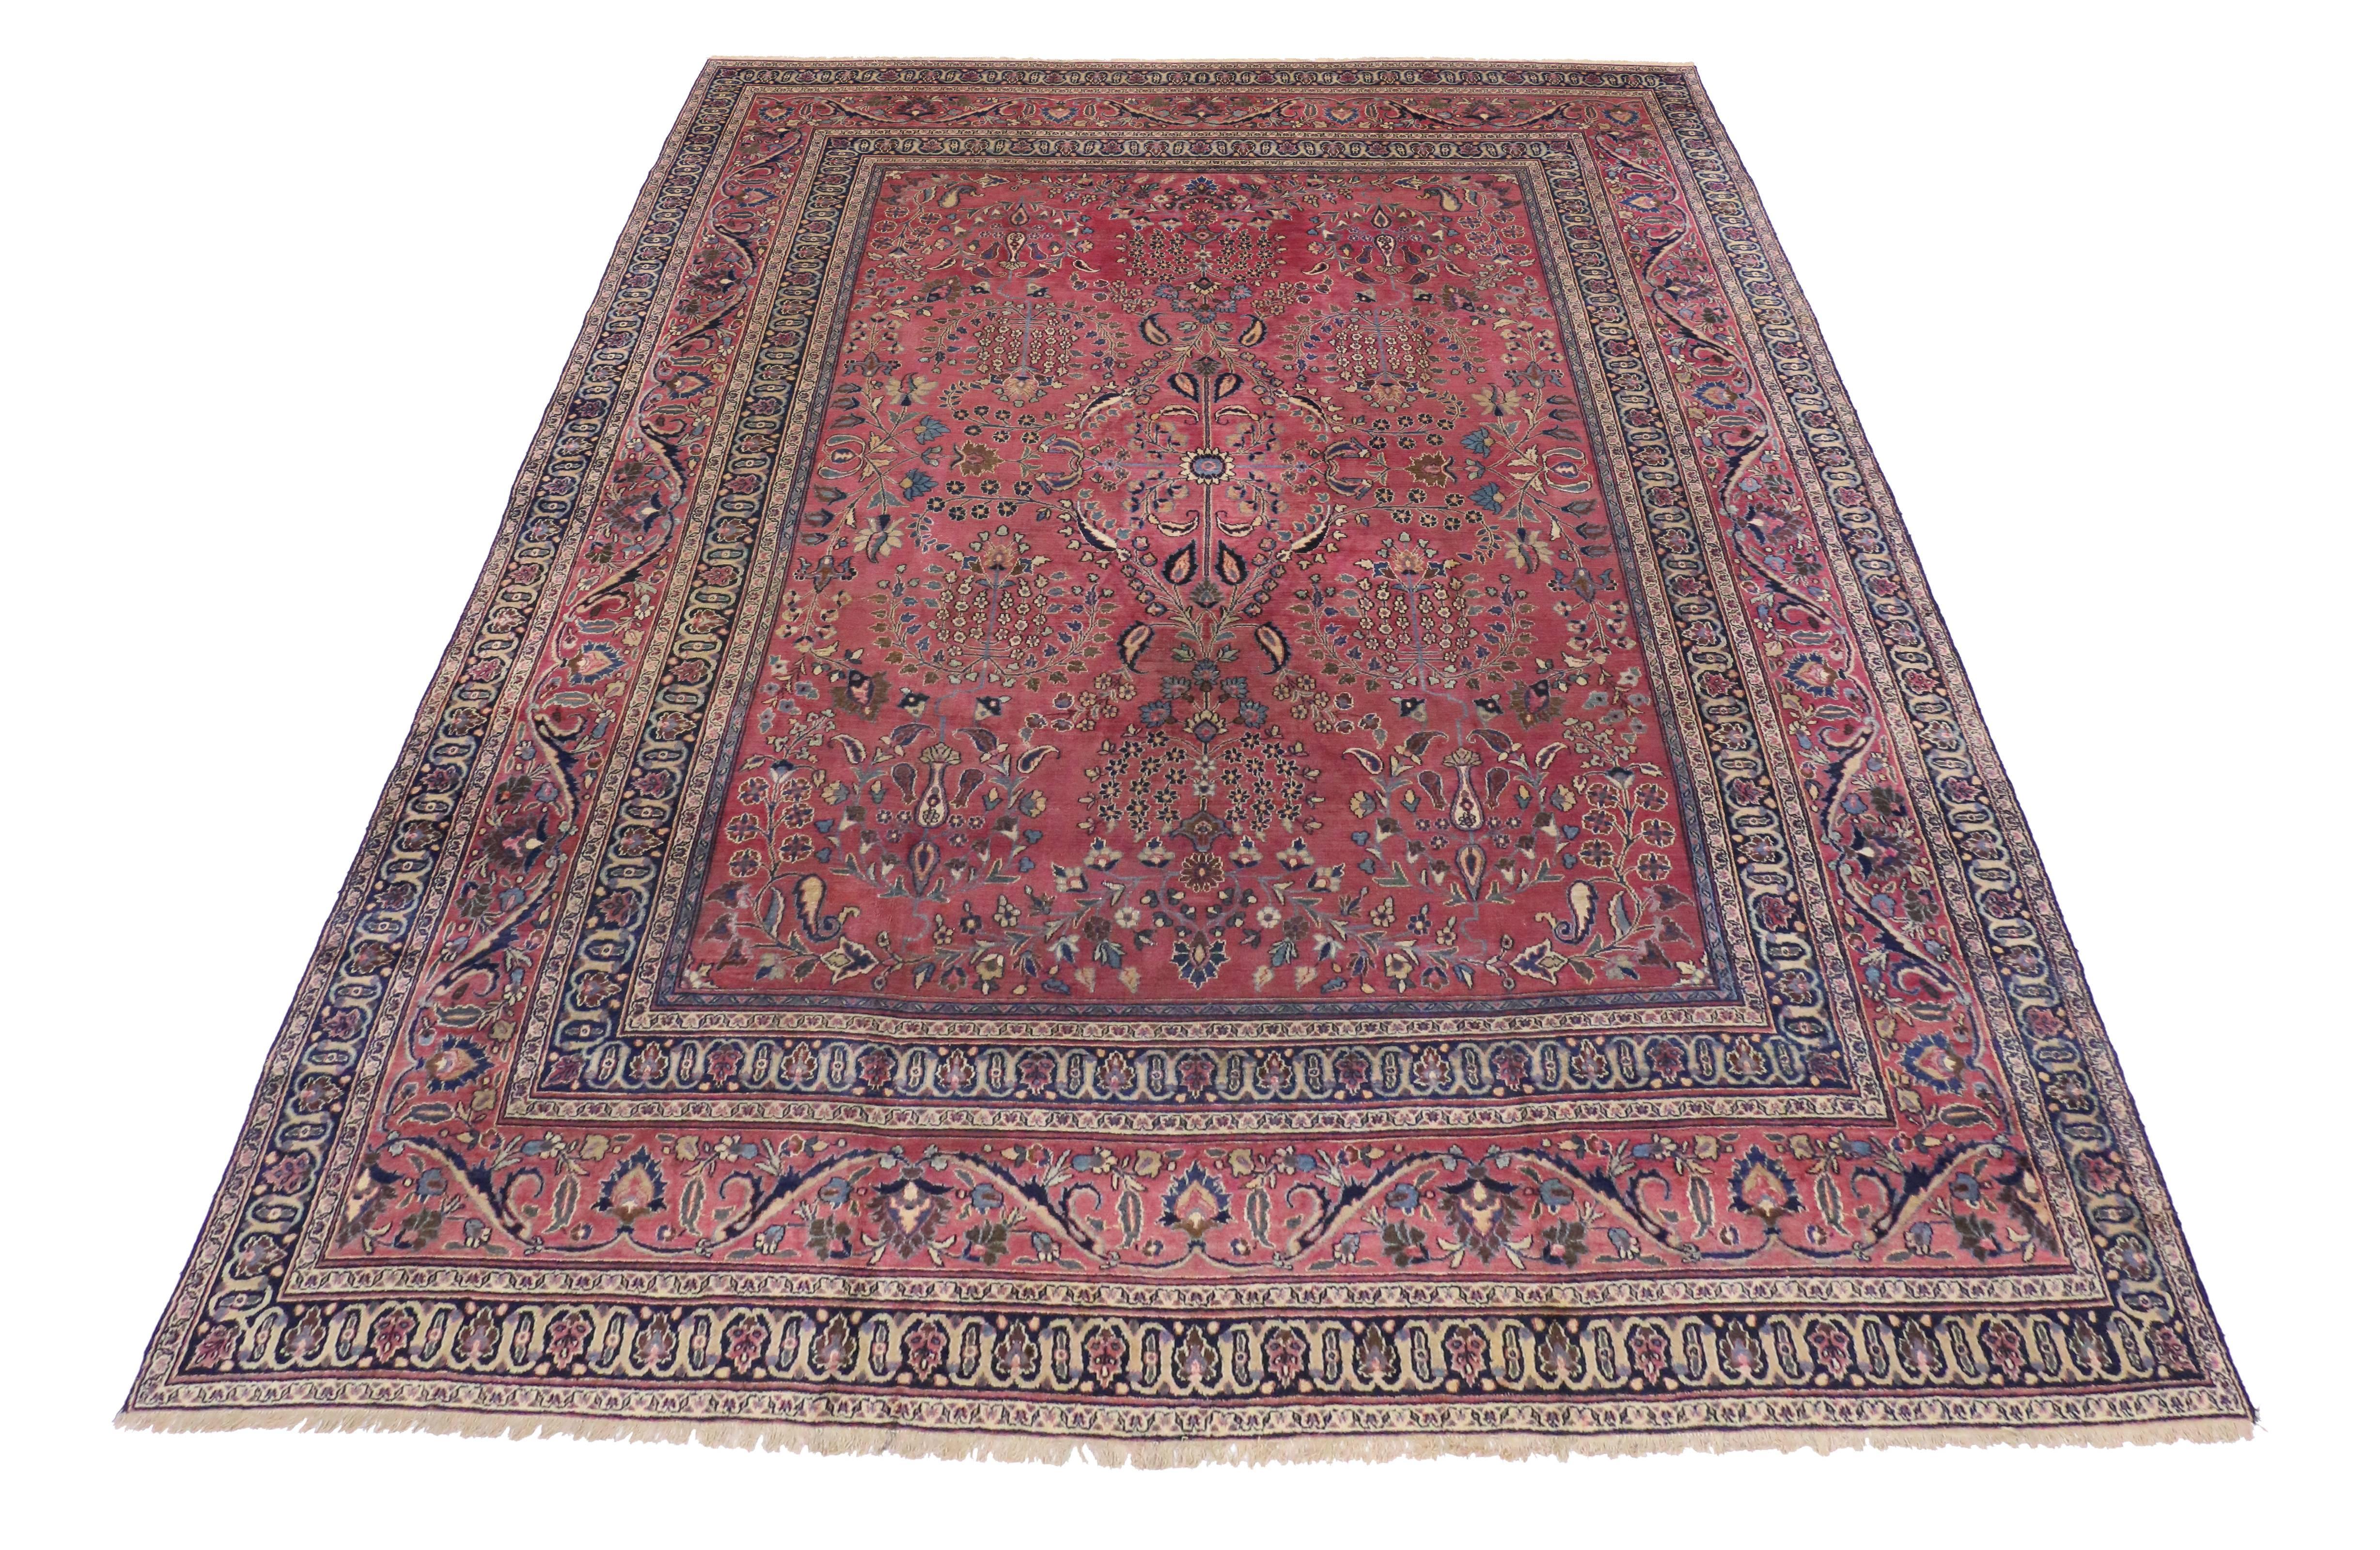 19th Century Antique Persian Khorassan Rug with Modern Victorian Style and Old World Vibes  For Sale